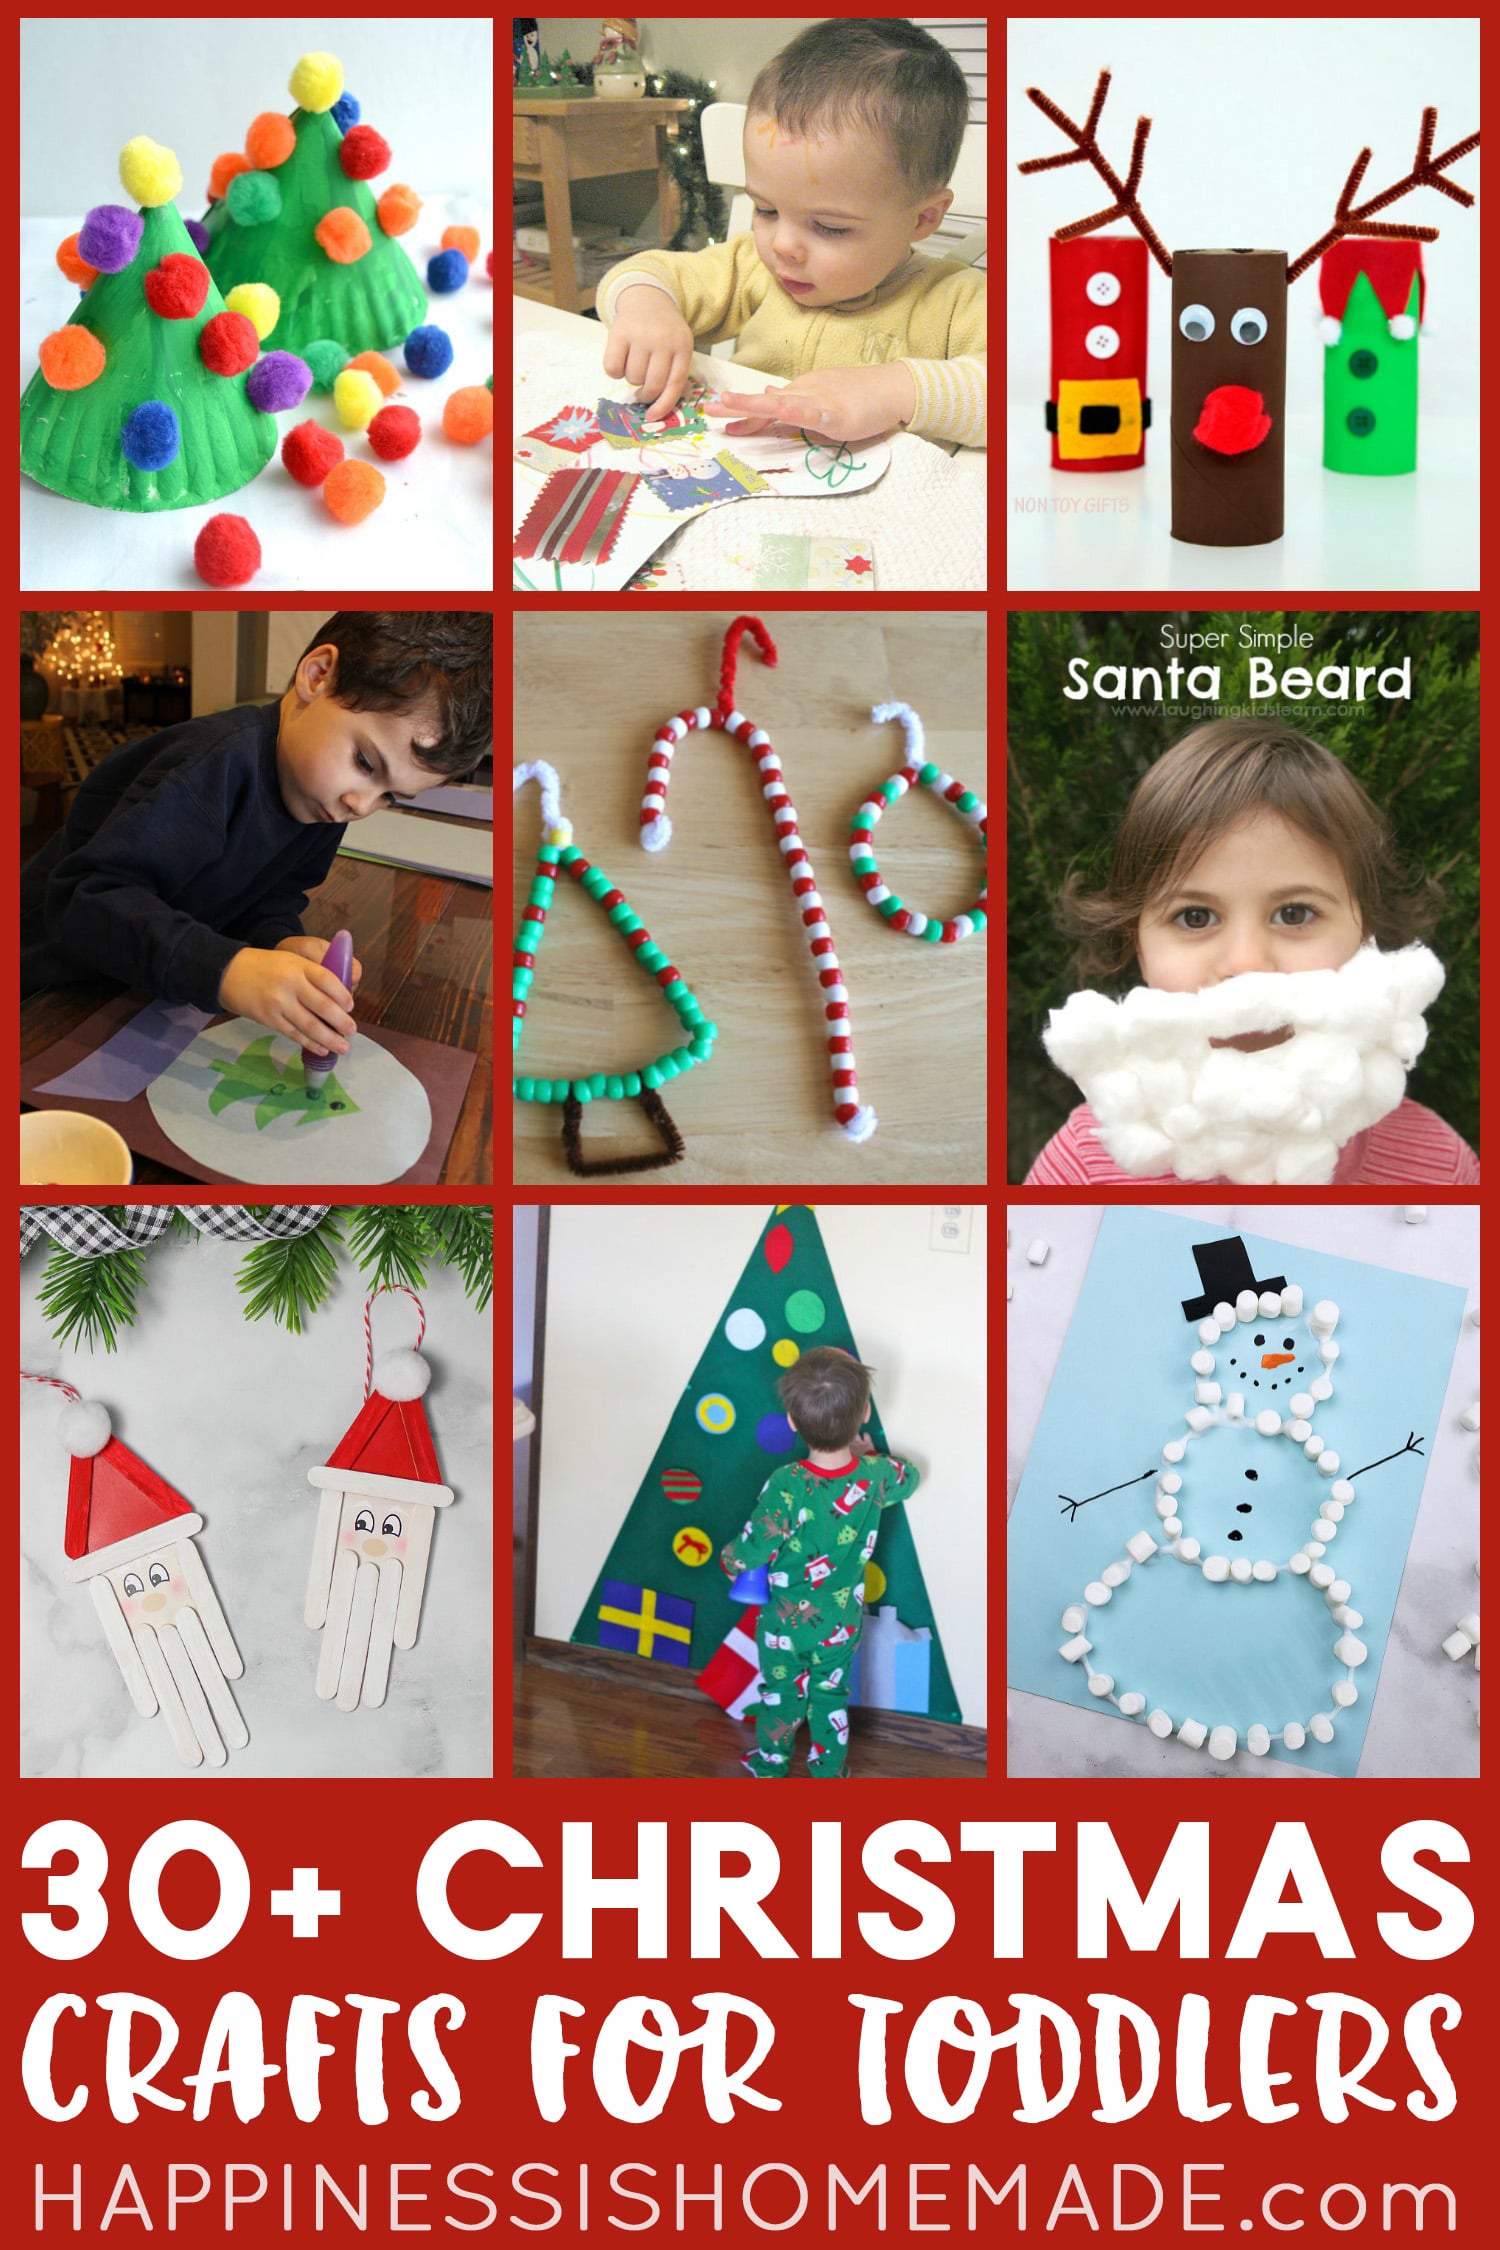 funny christmas picture ideas for kids